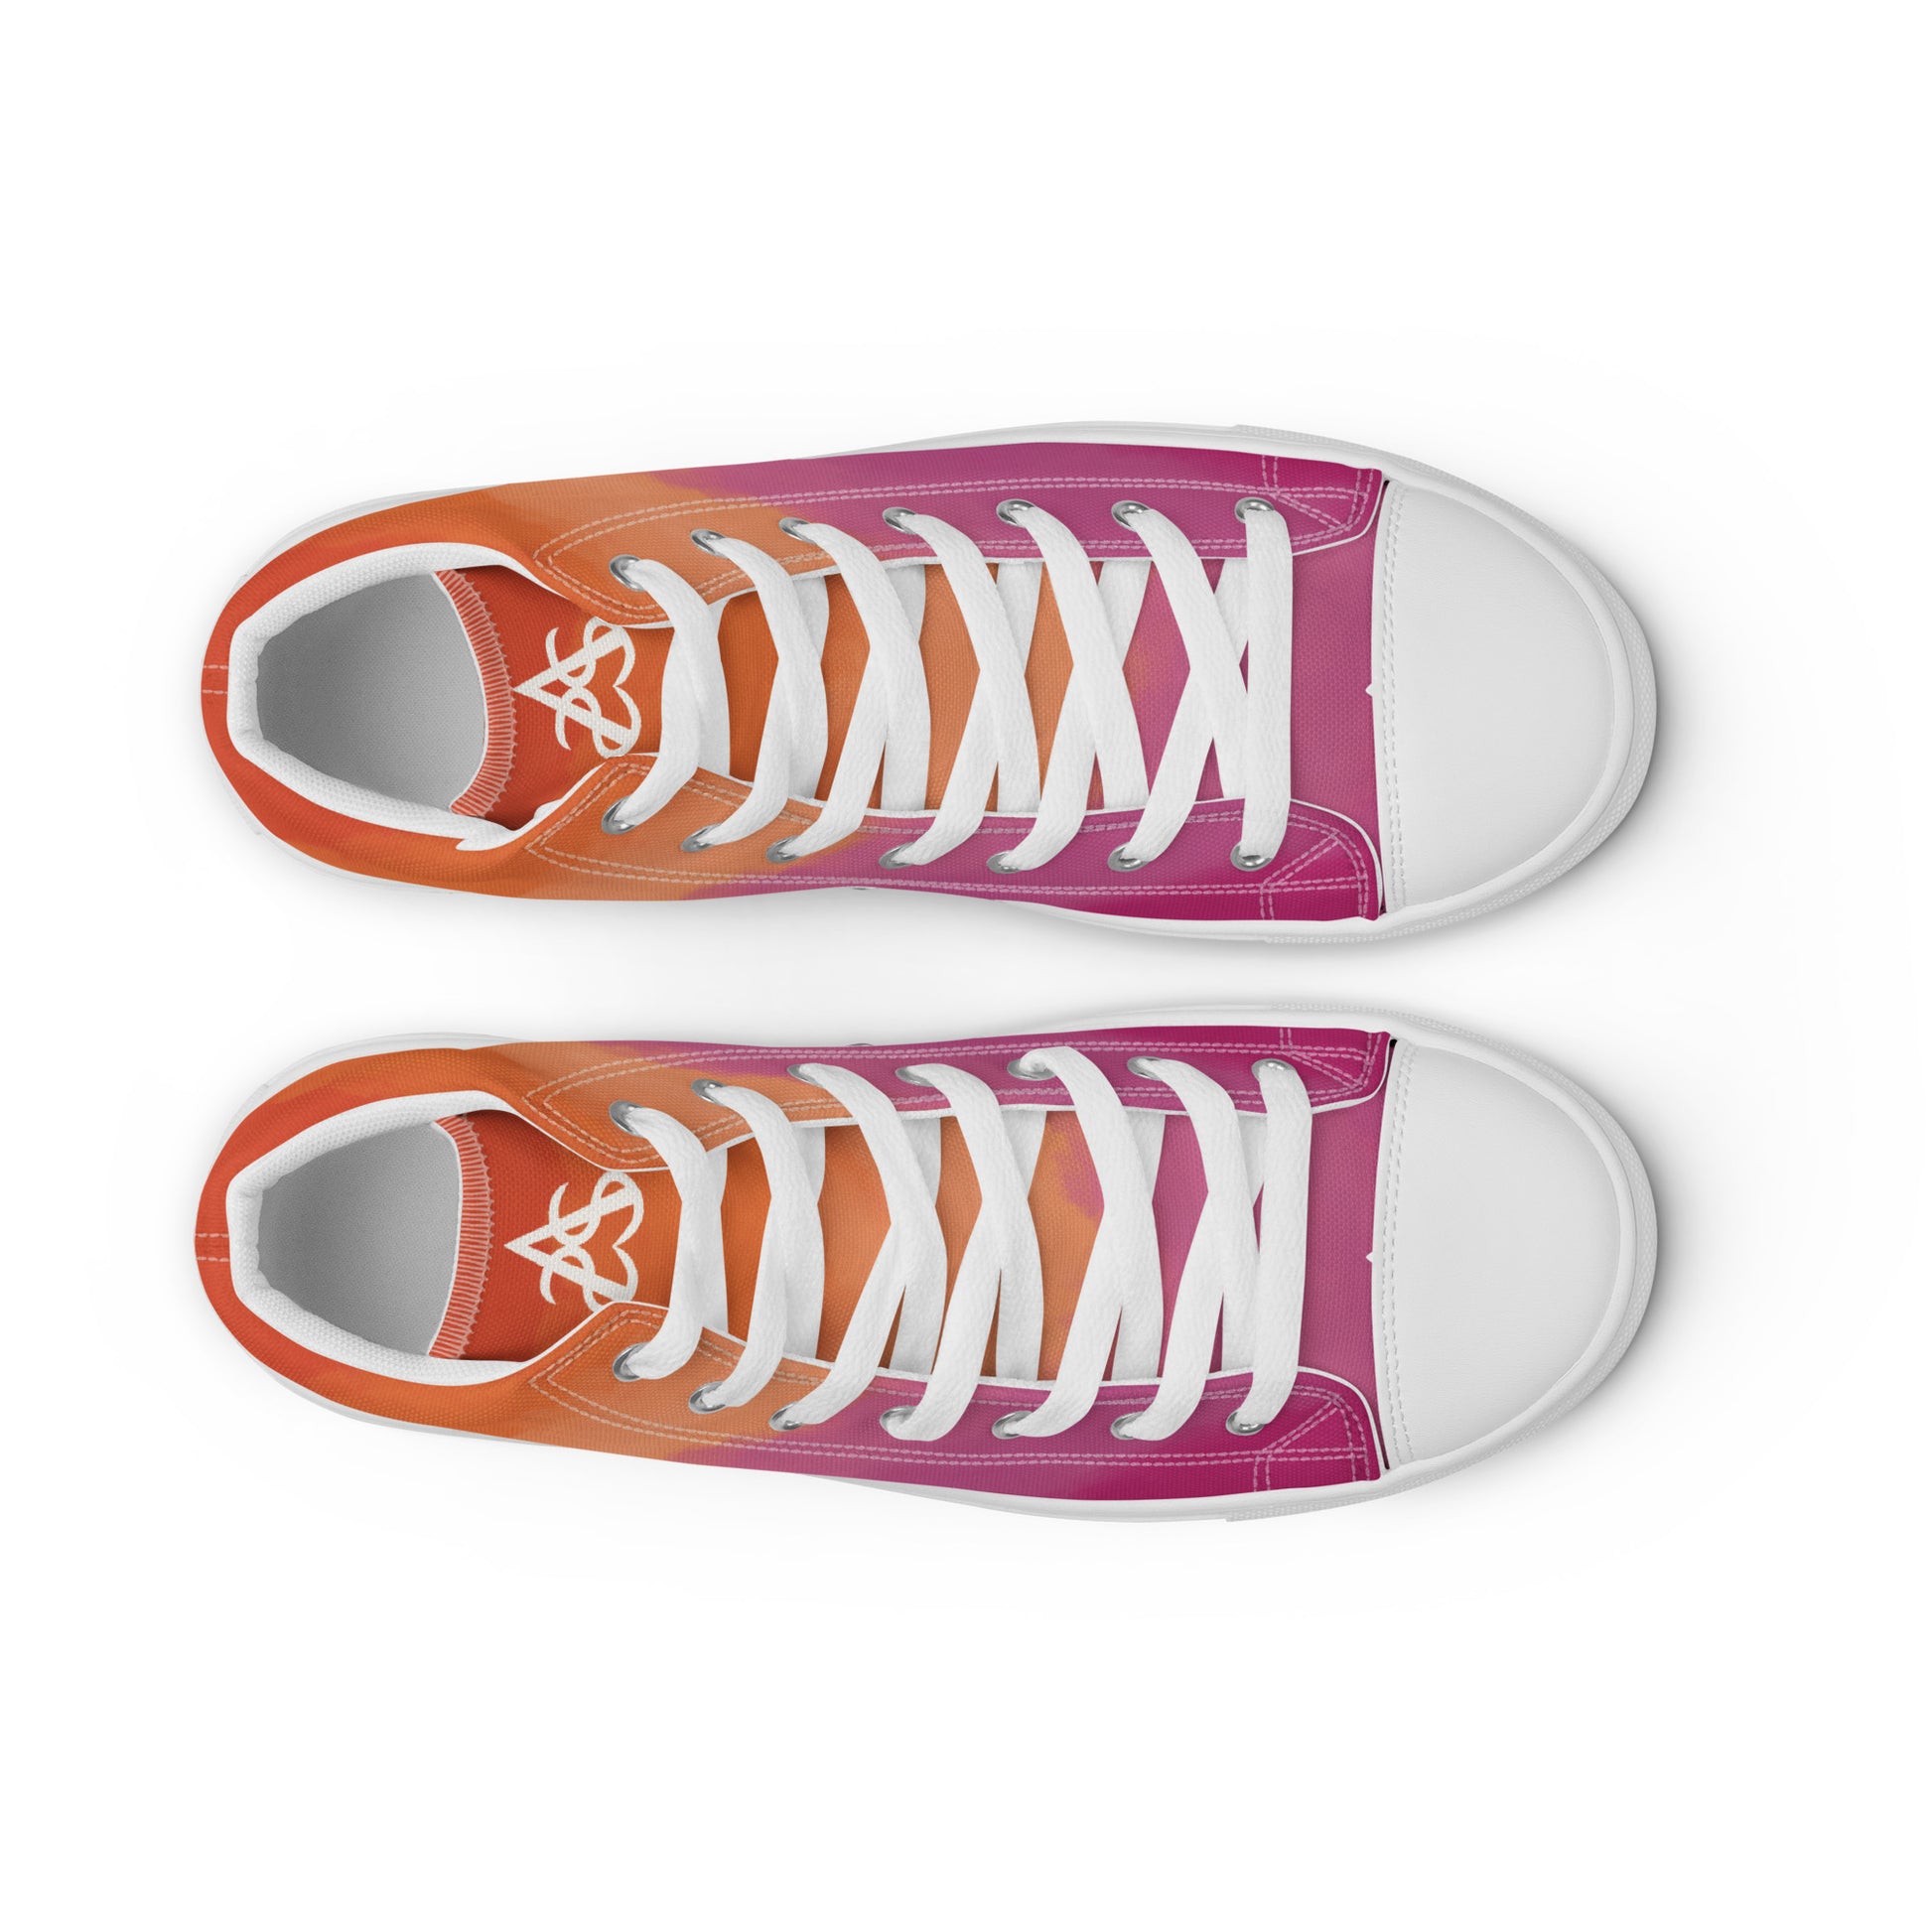 Top view: A pair of high top shoes with cloud layers in the lesbian flag colors, a white heart on the heel, and the Aras Sivad Studio logo on the tongue.